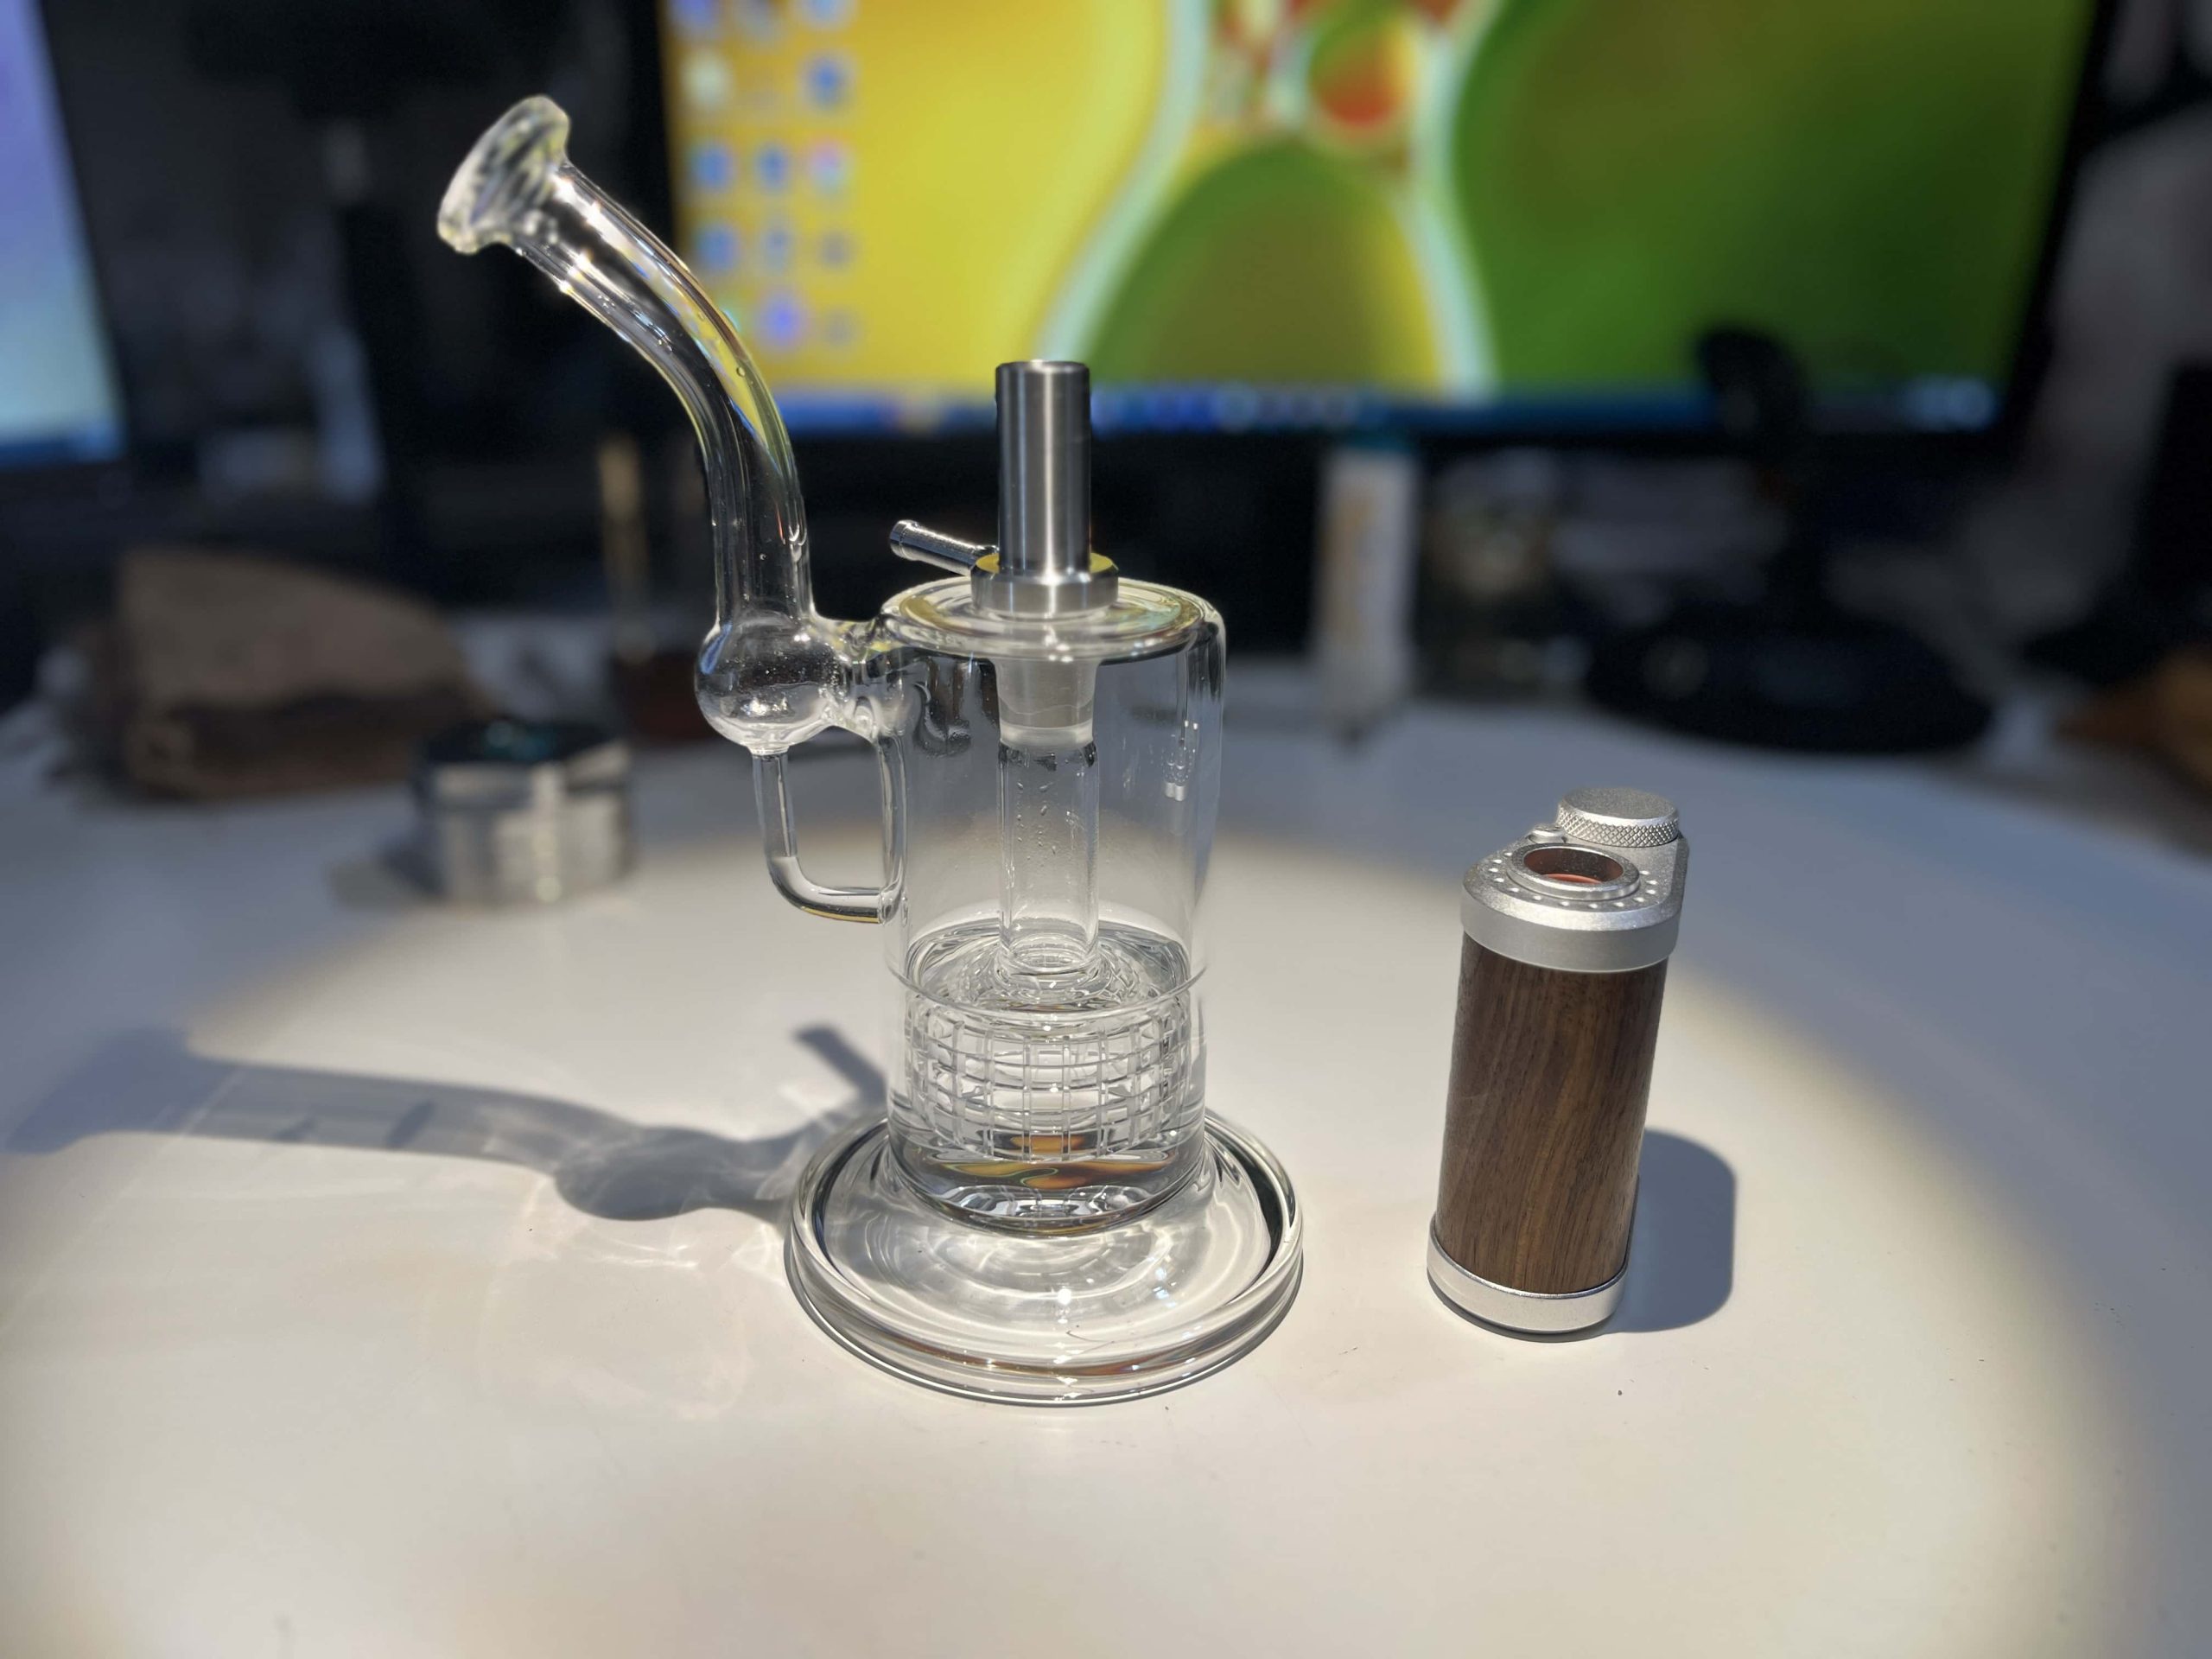 TinyMight 2 next to bubbler